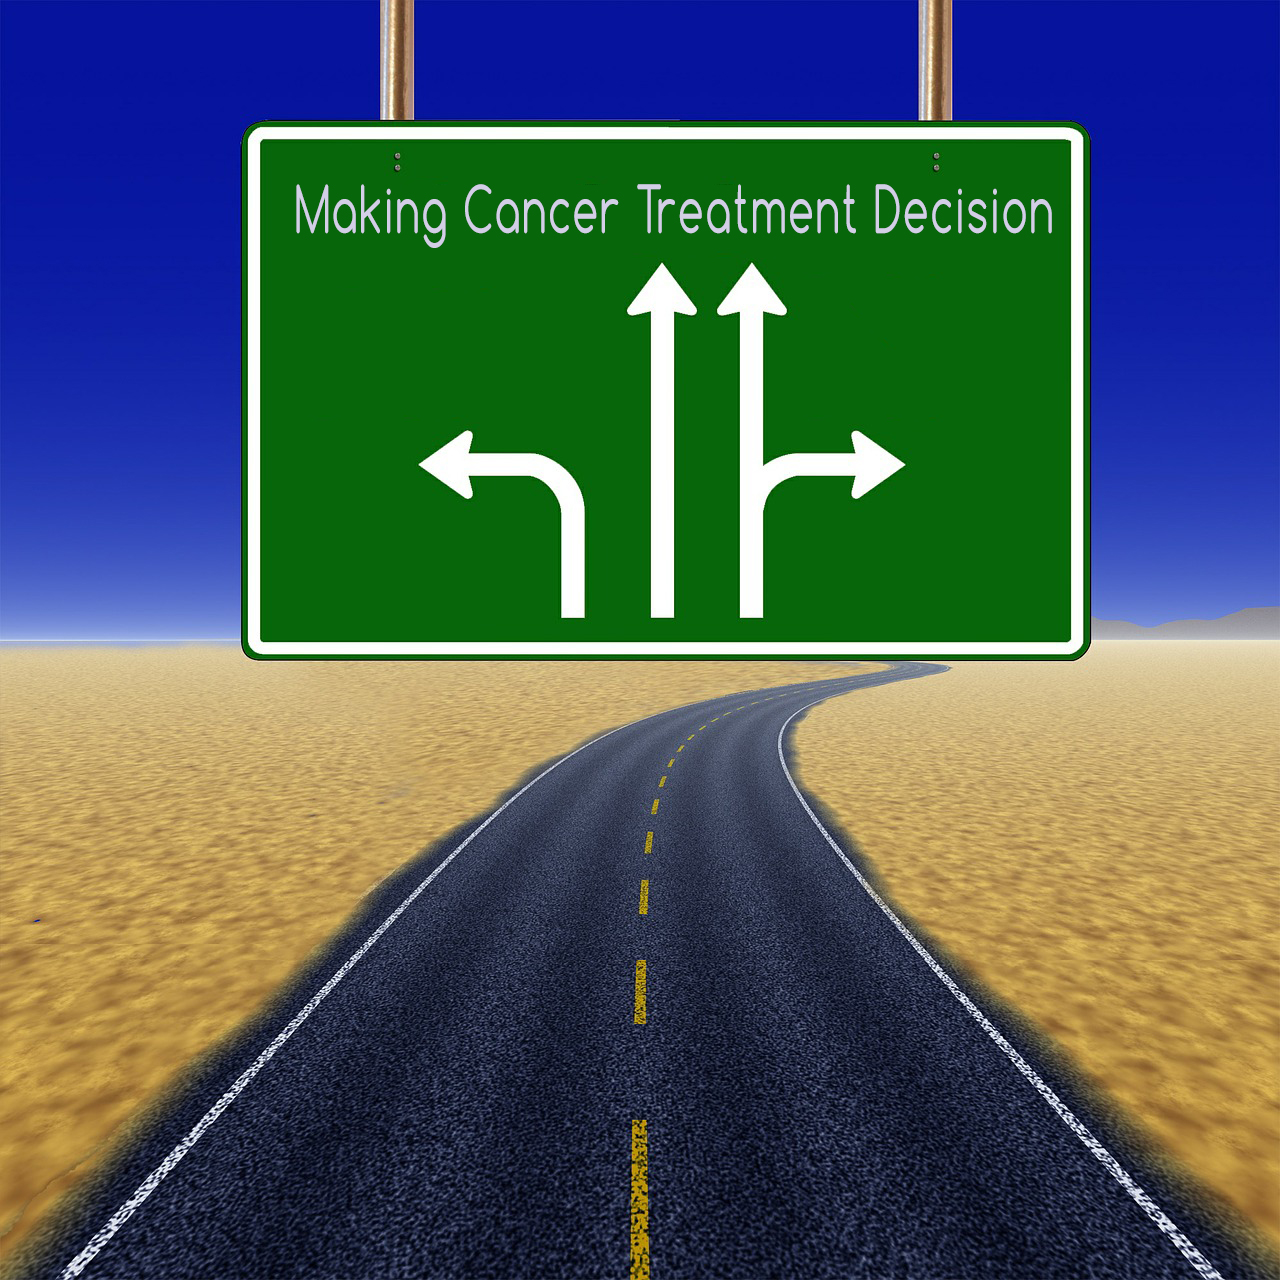 Making Cancer treatment decisions